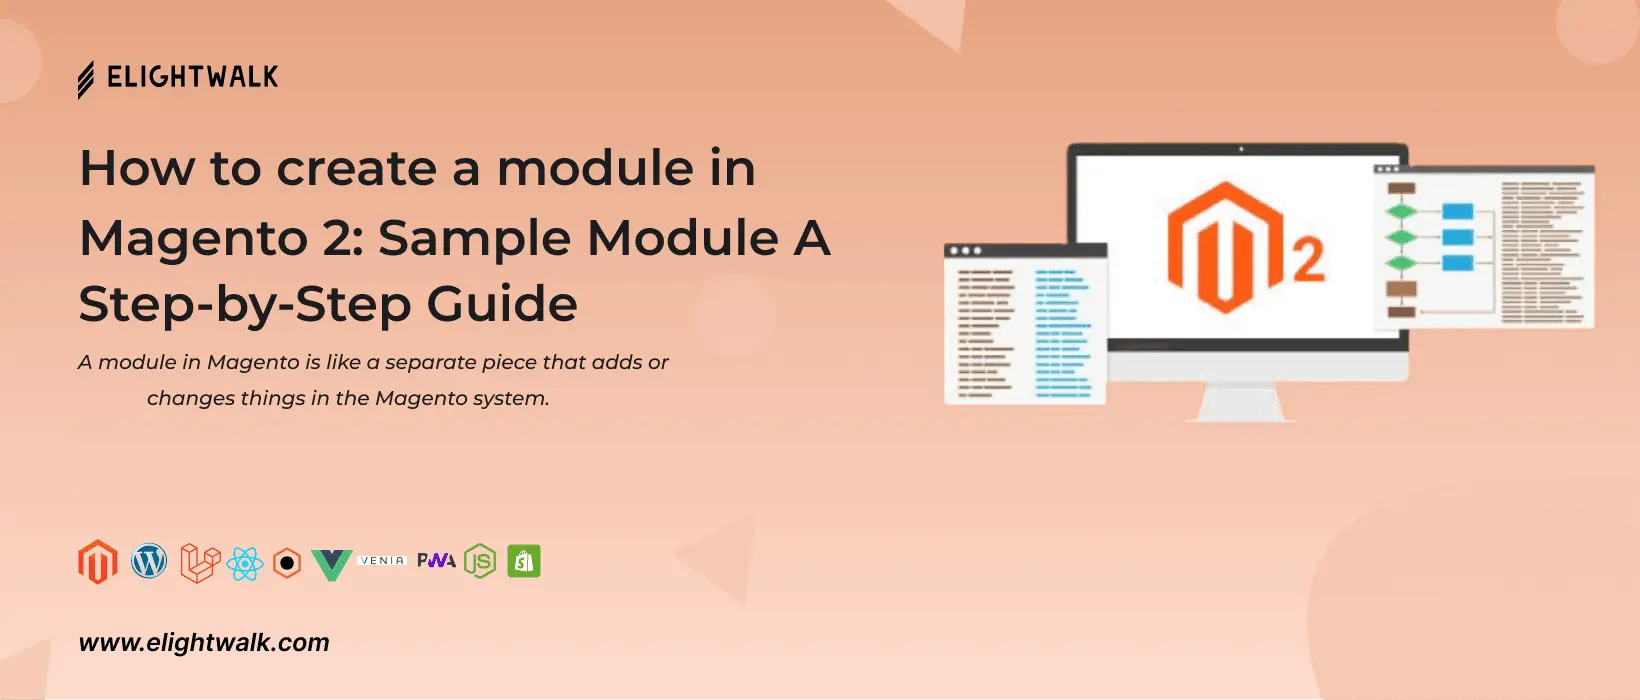 How to create a module in Magento 2: Sample Module A Step-by-Step Guide